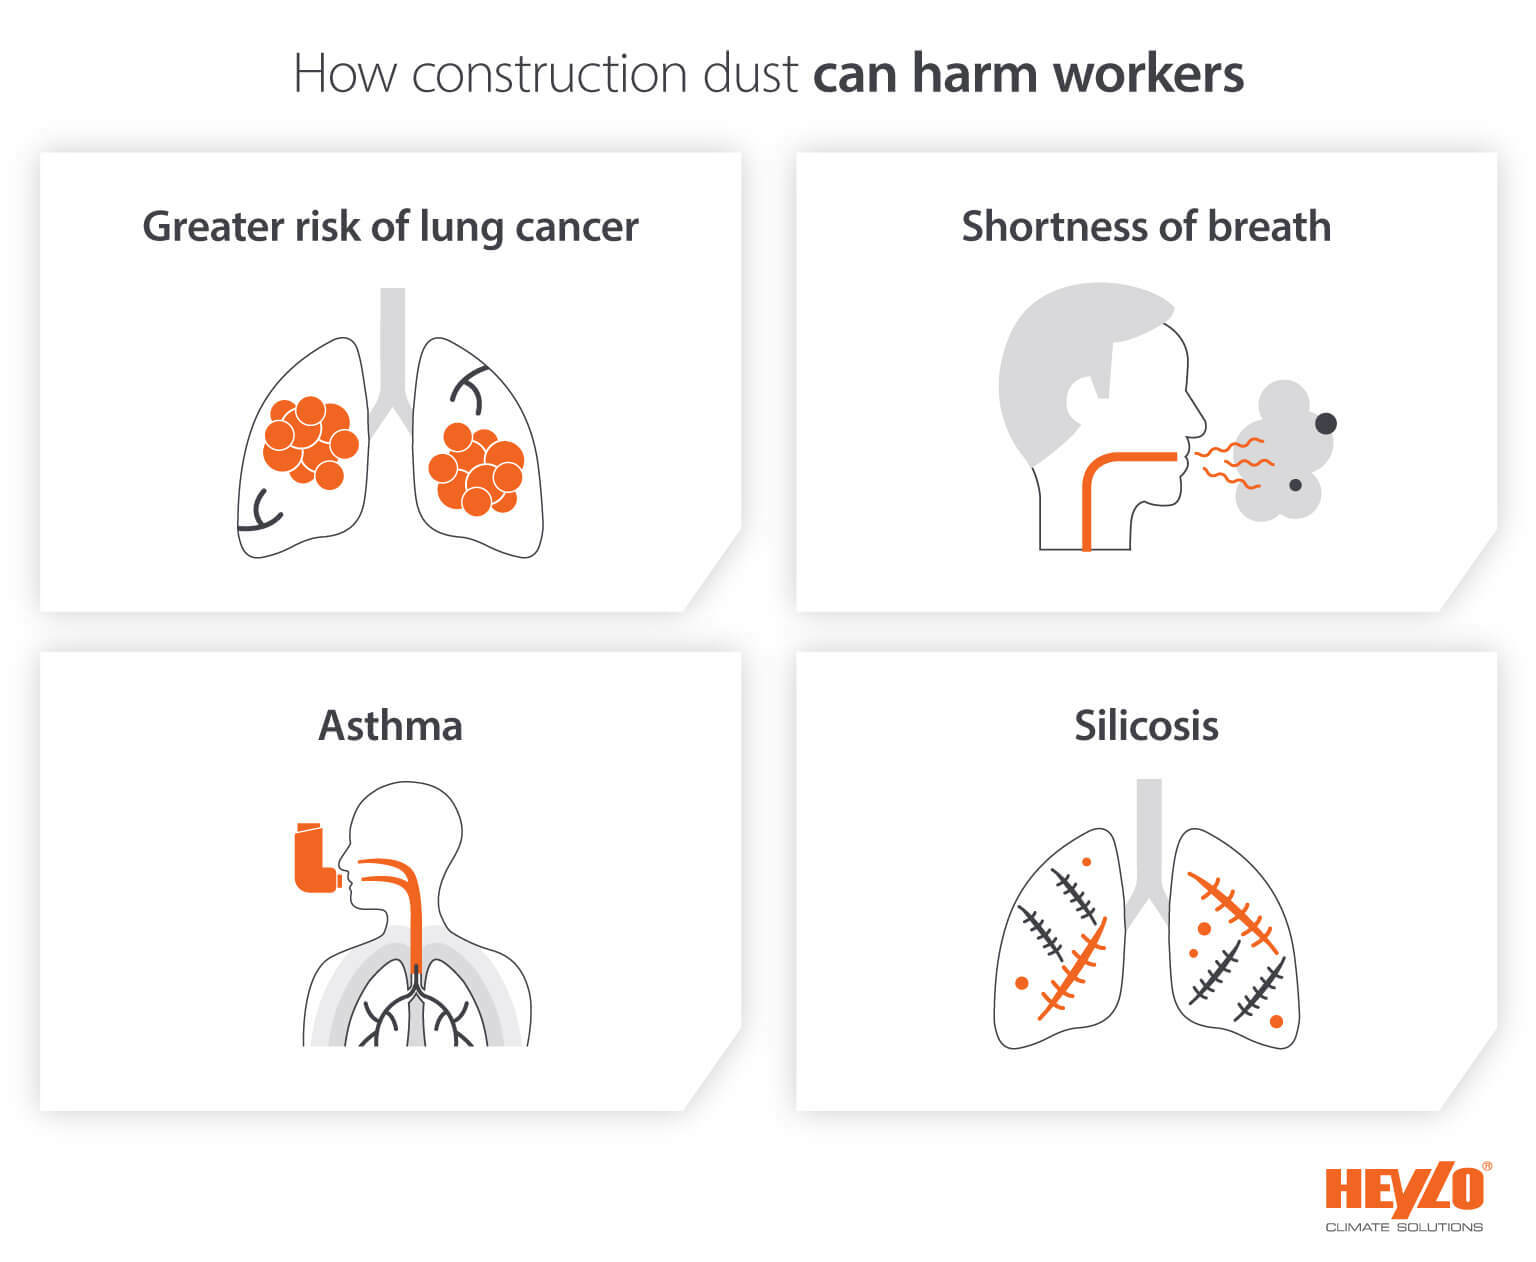 Construction worker health related effects of breathing construction dust over time - infographic